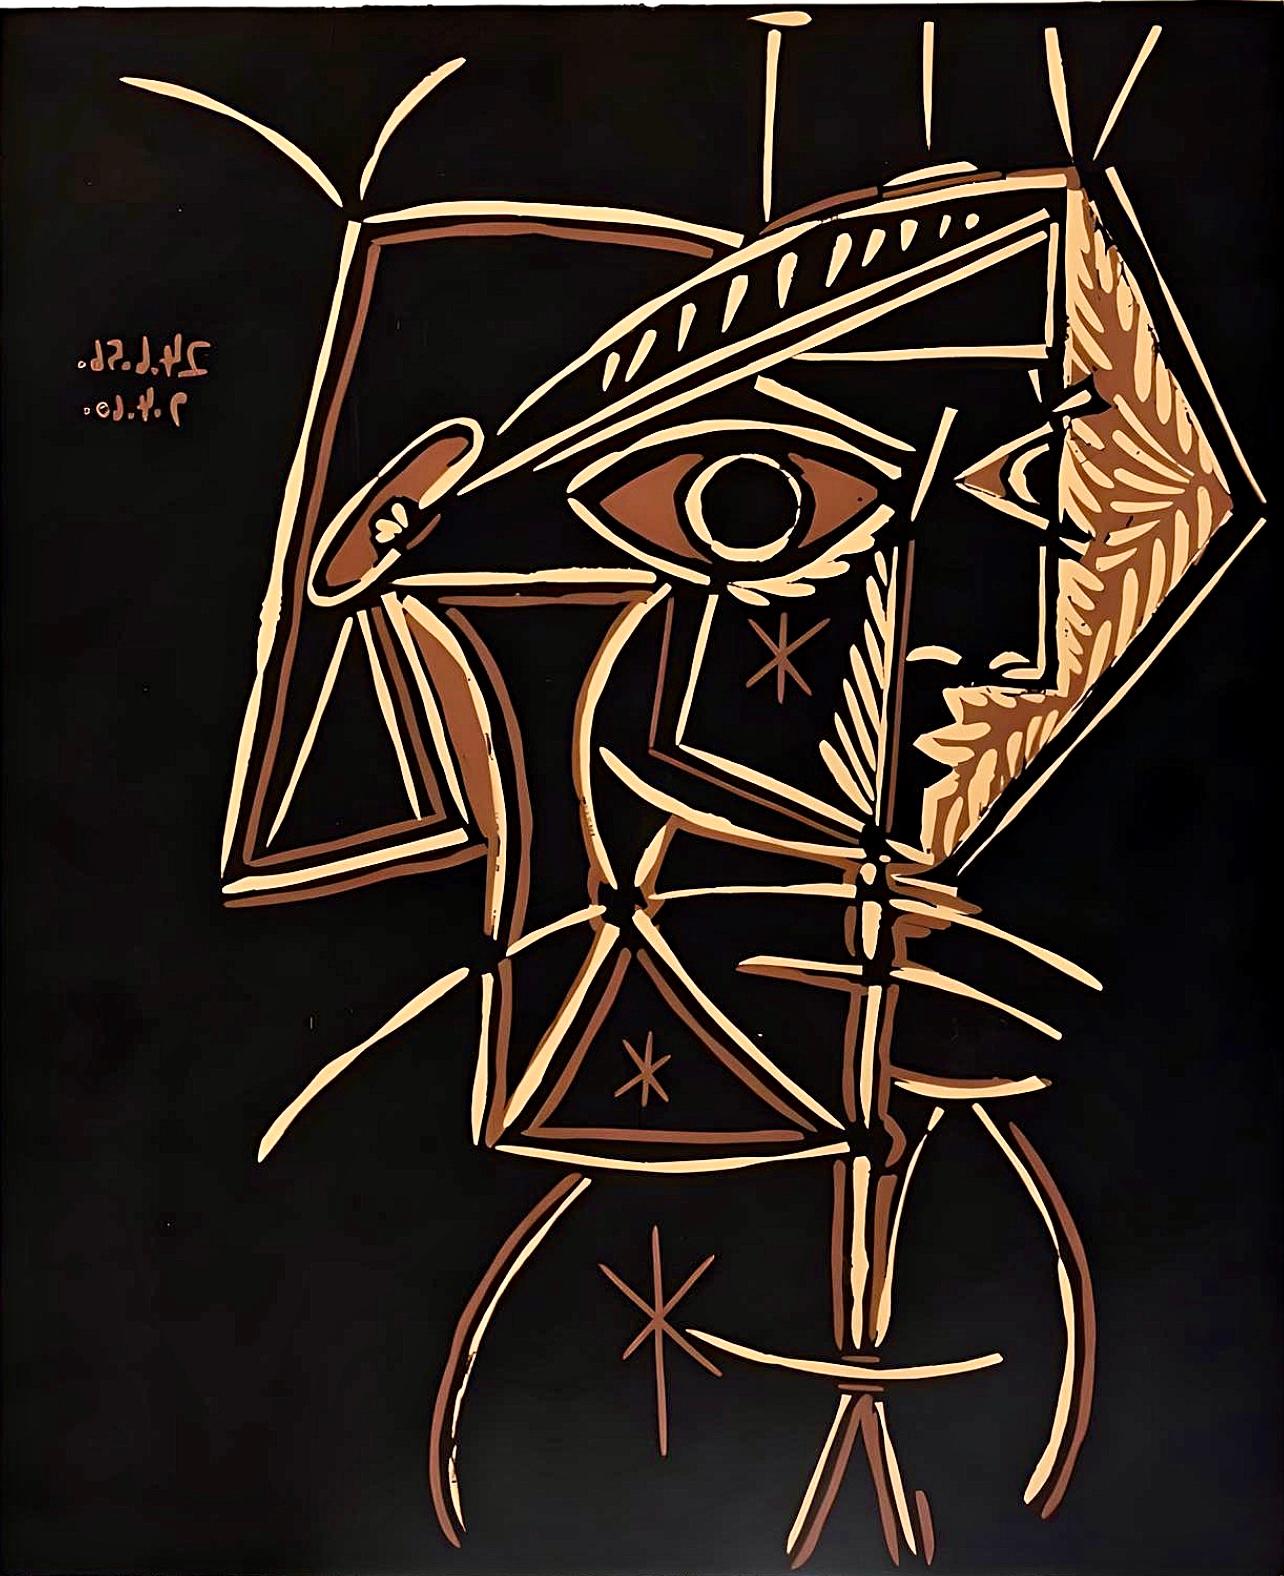 Picasso, Bust of a Woman: Jacqueline, Pablo Picasso-Linogravures (after)